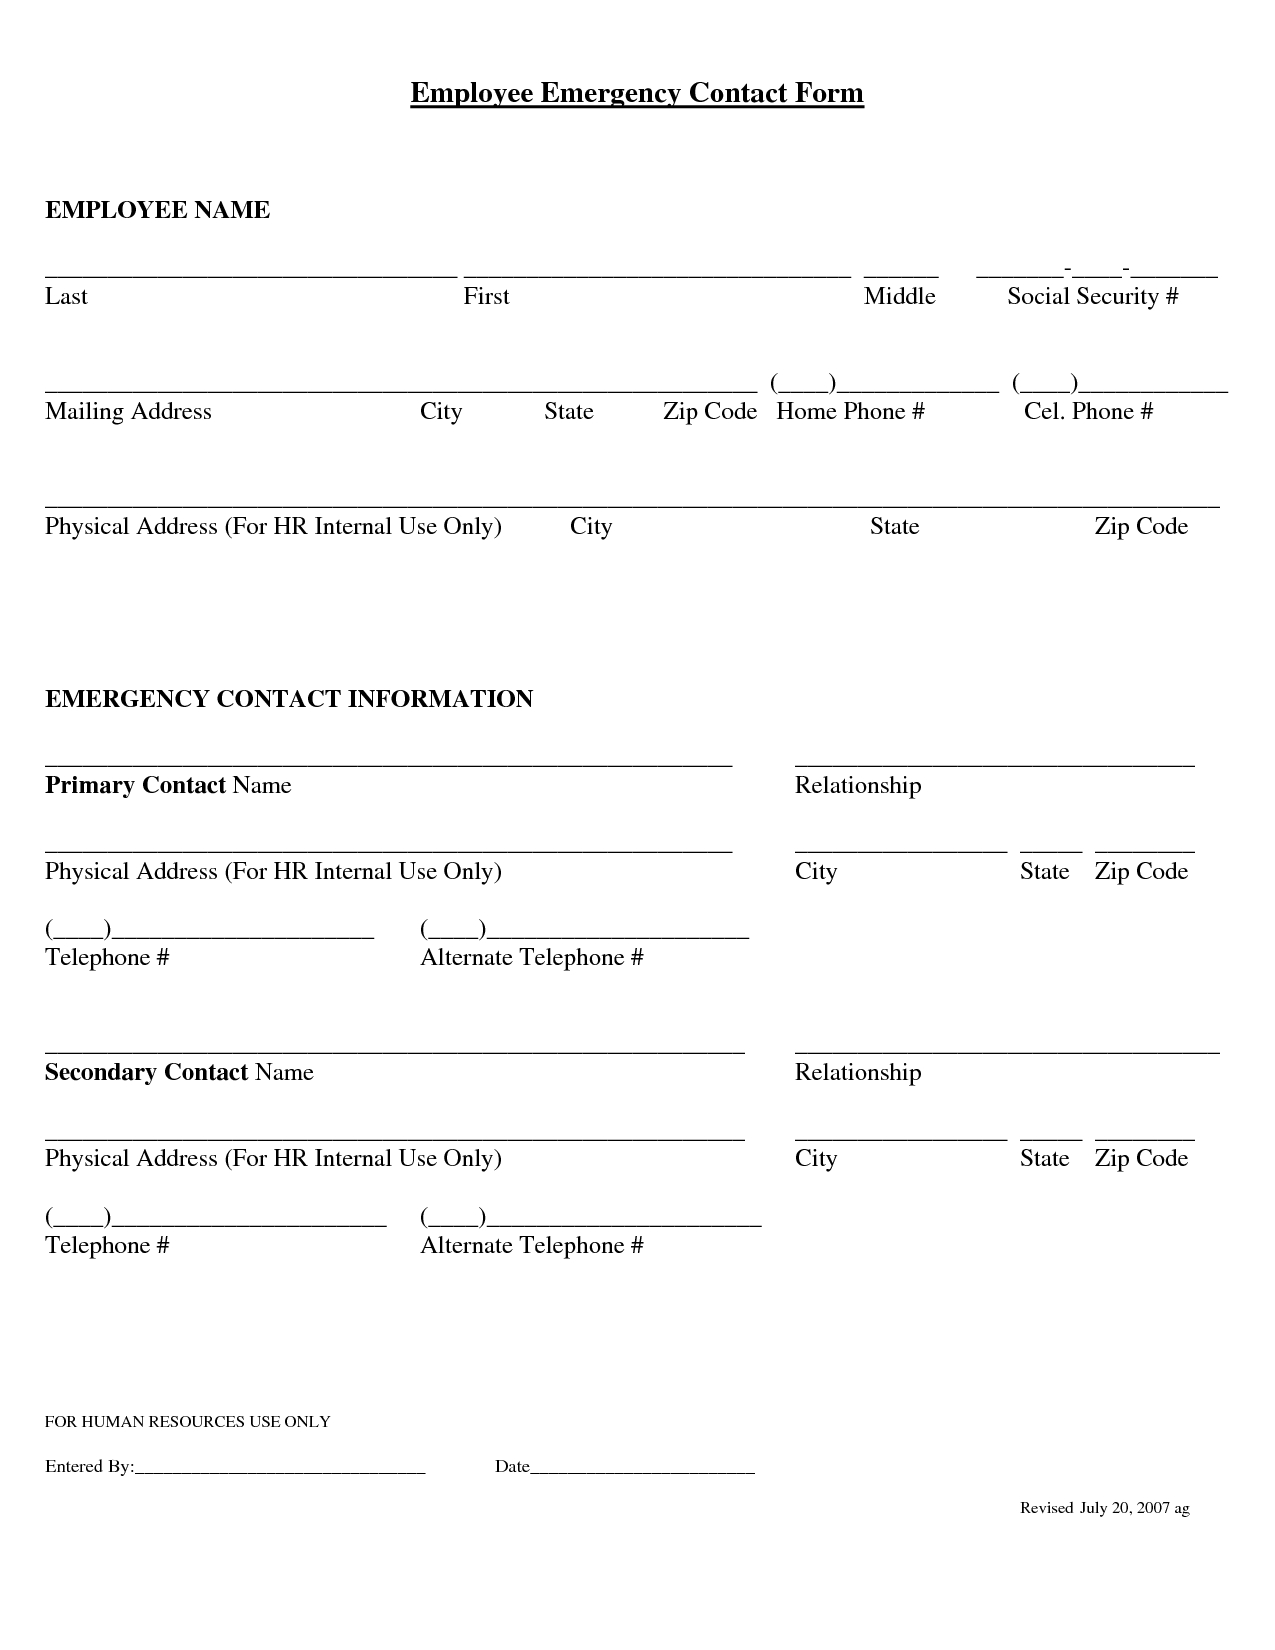 004 Emergency Contact Form Template Ideas Excellent Regarding Word Employee Suggestion Form Template